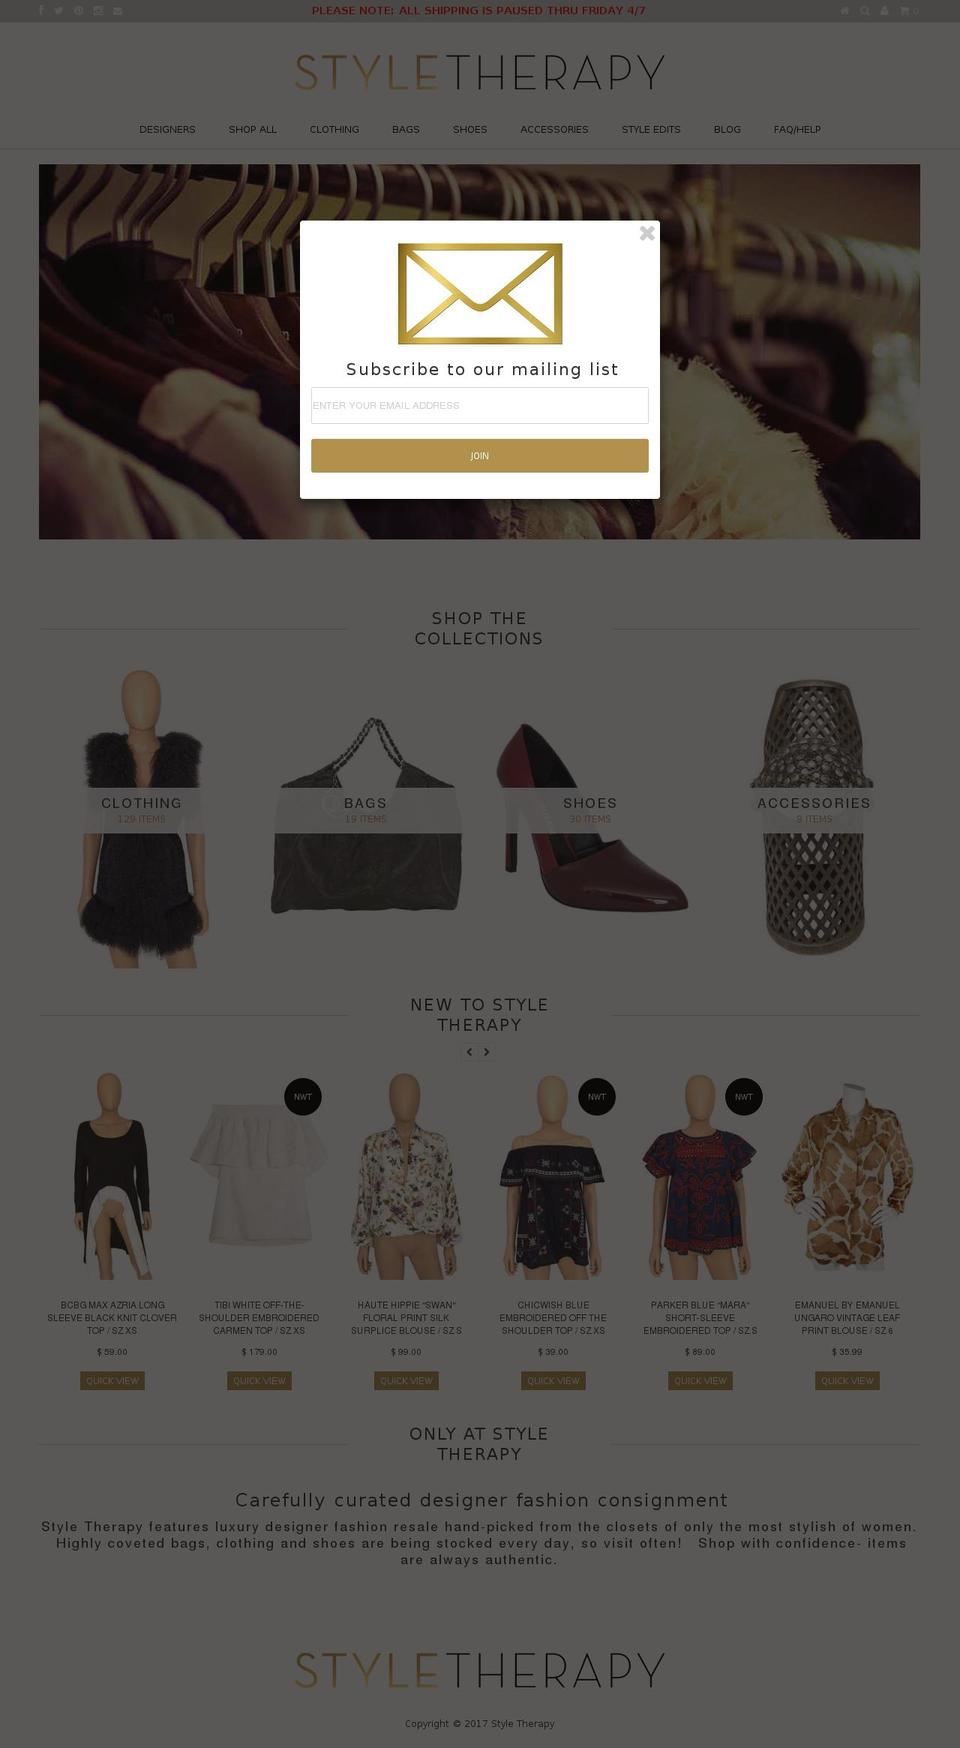 Shella Shopify theme site example shopstyletherapy.com